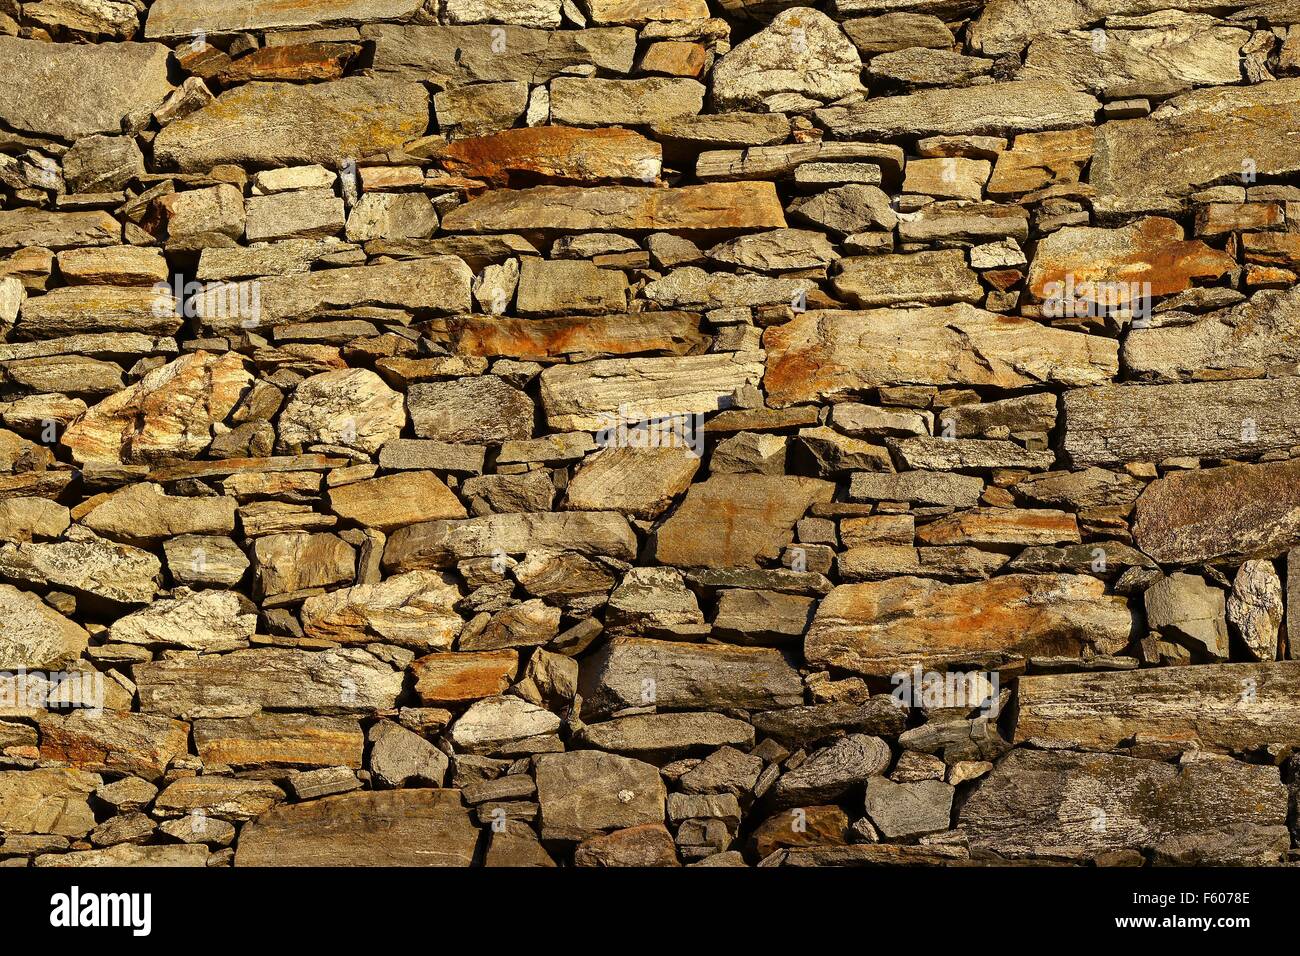 Granite block wall as texture or background Stock Photo